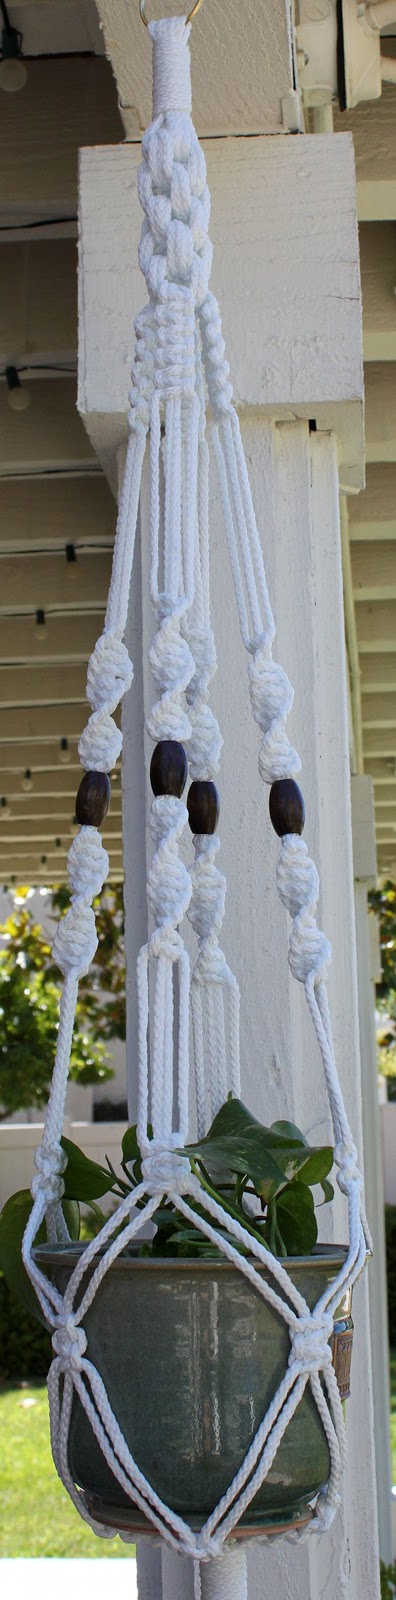 20-diy-macrame-plant-hanger-patterns-do-it-yourself-ideas-and-projects